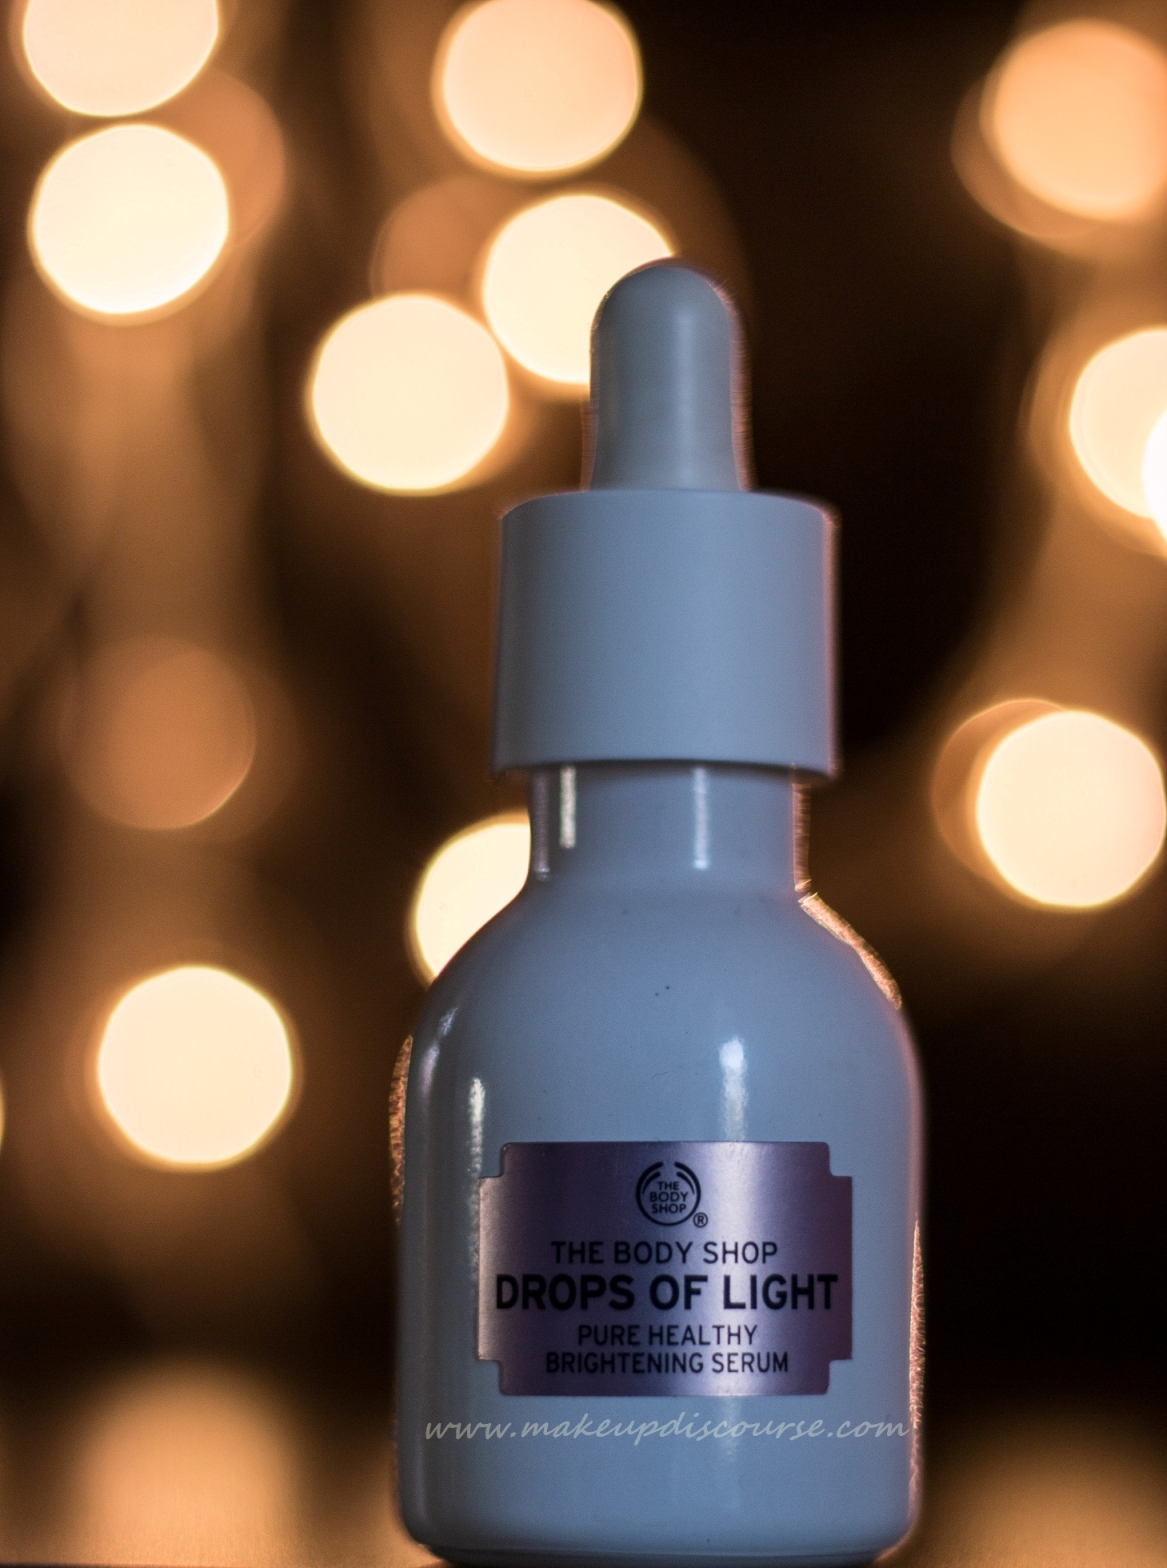 Cruelty-free Skincare, The Body Shop Drops of Light Brightening Serum  Review